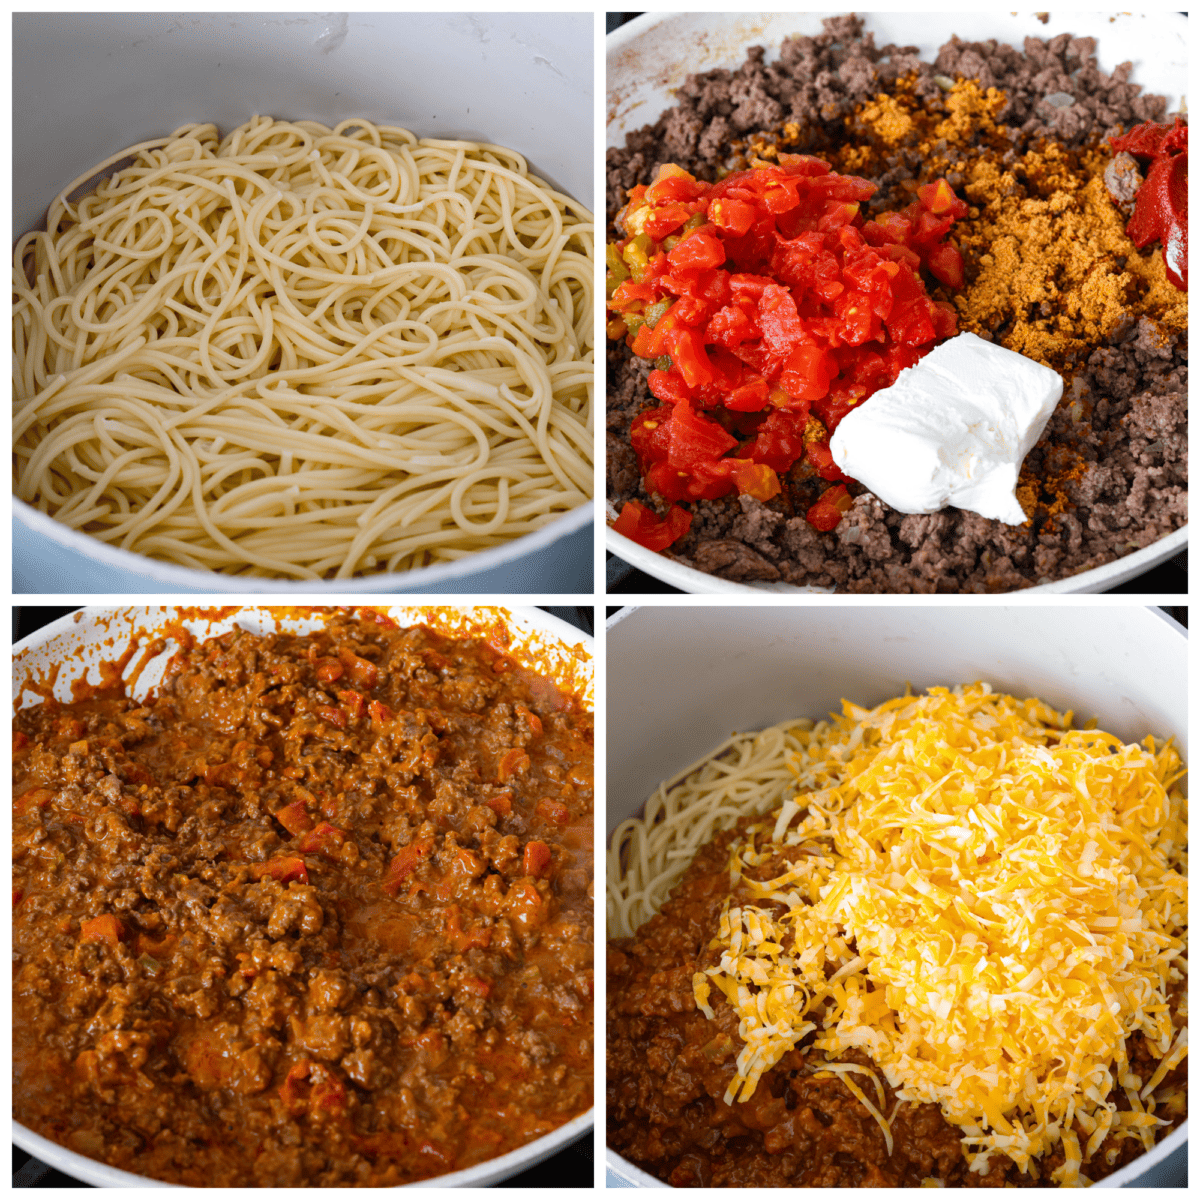 4-photo collage of the noodles being combined with the taco meat, cheese, and toppings.